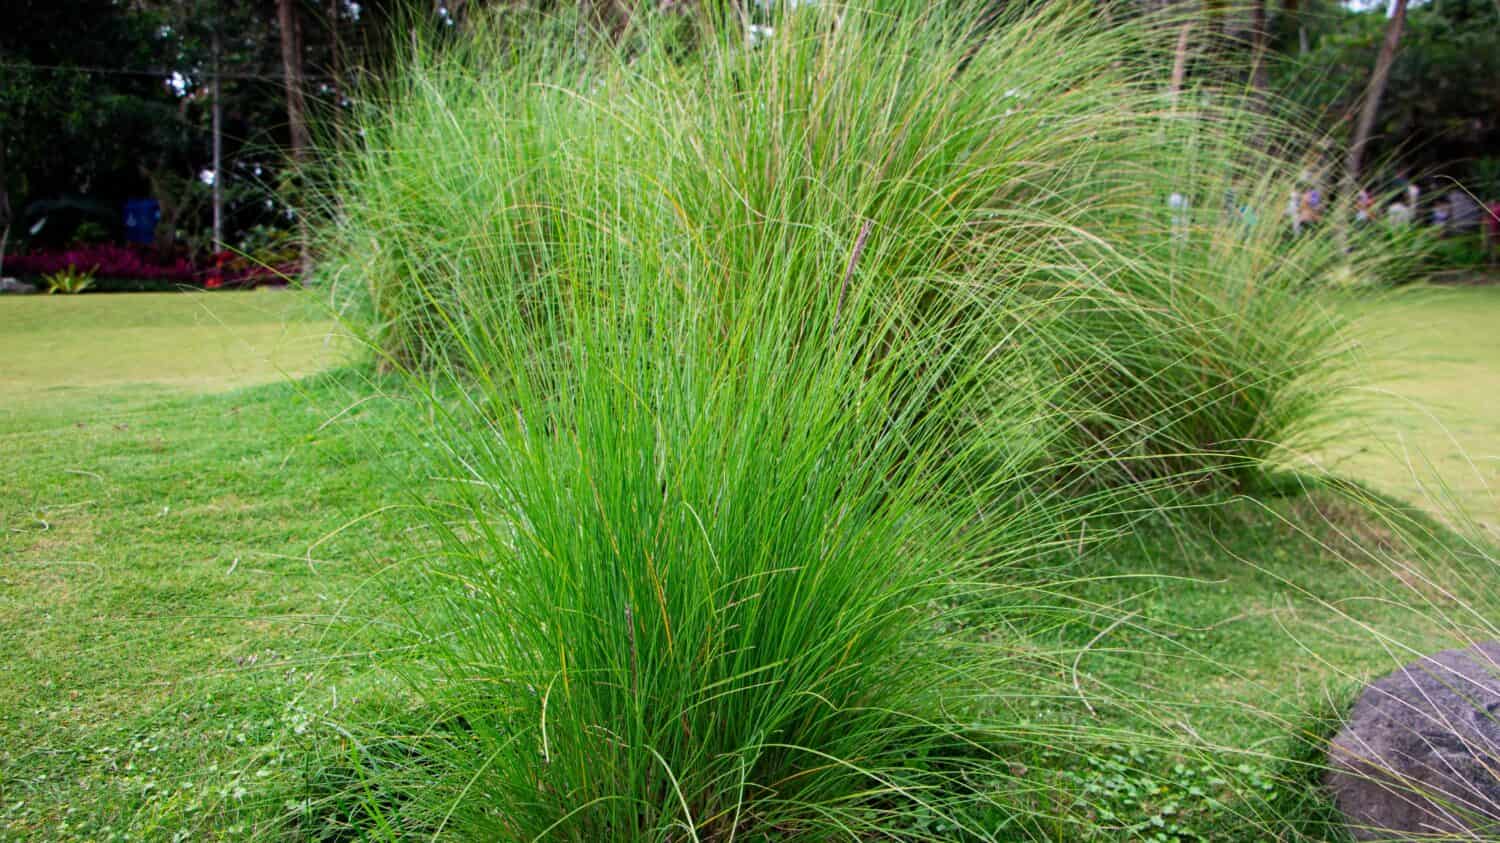 The foliage (leaves) of prairie dropseed grass growing on green grass in beautiful garden